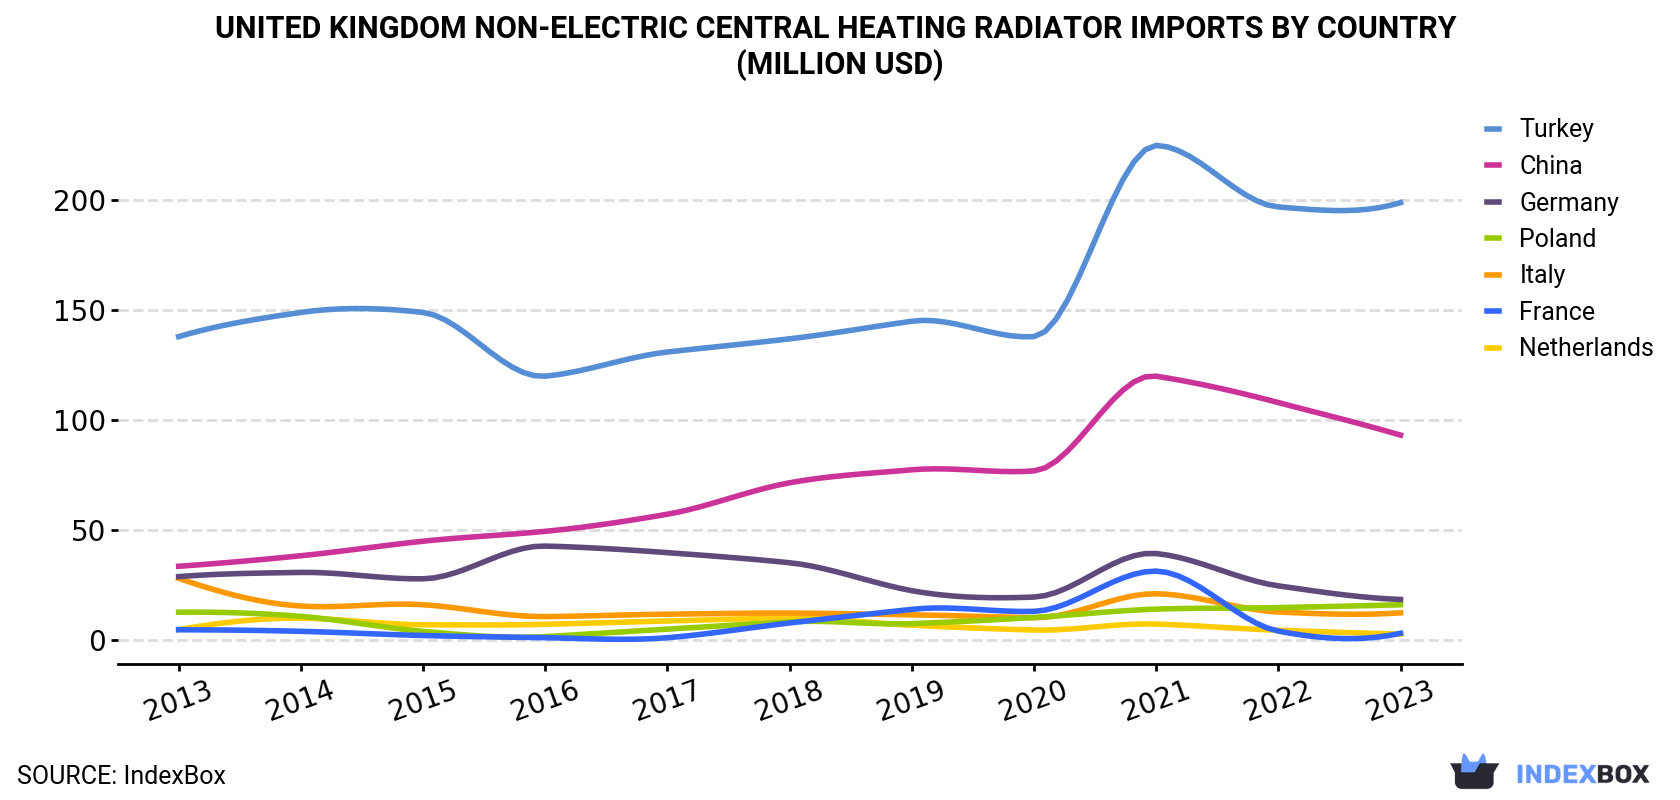 United Kingdom Non-Electric Central Heating Radiator Imports By Country (Million USD)